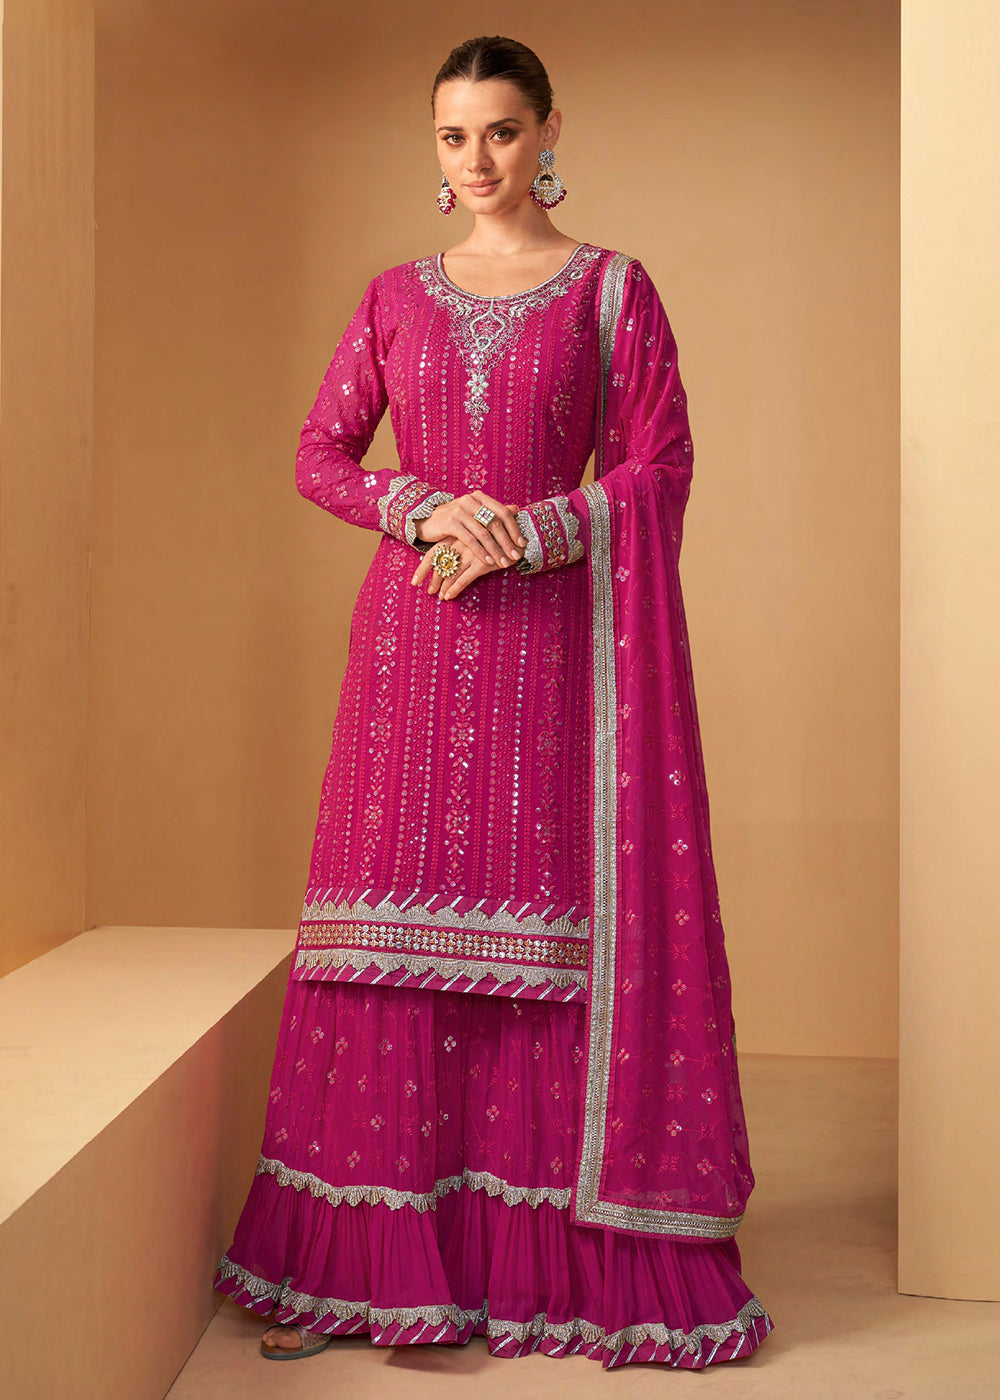 Shop Now Pretty Hot Pink Sequins Embroidered Sharara Style Suit Online at Empress Clothing in USA, UK, Canada, Germany & Worldwide.